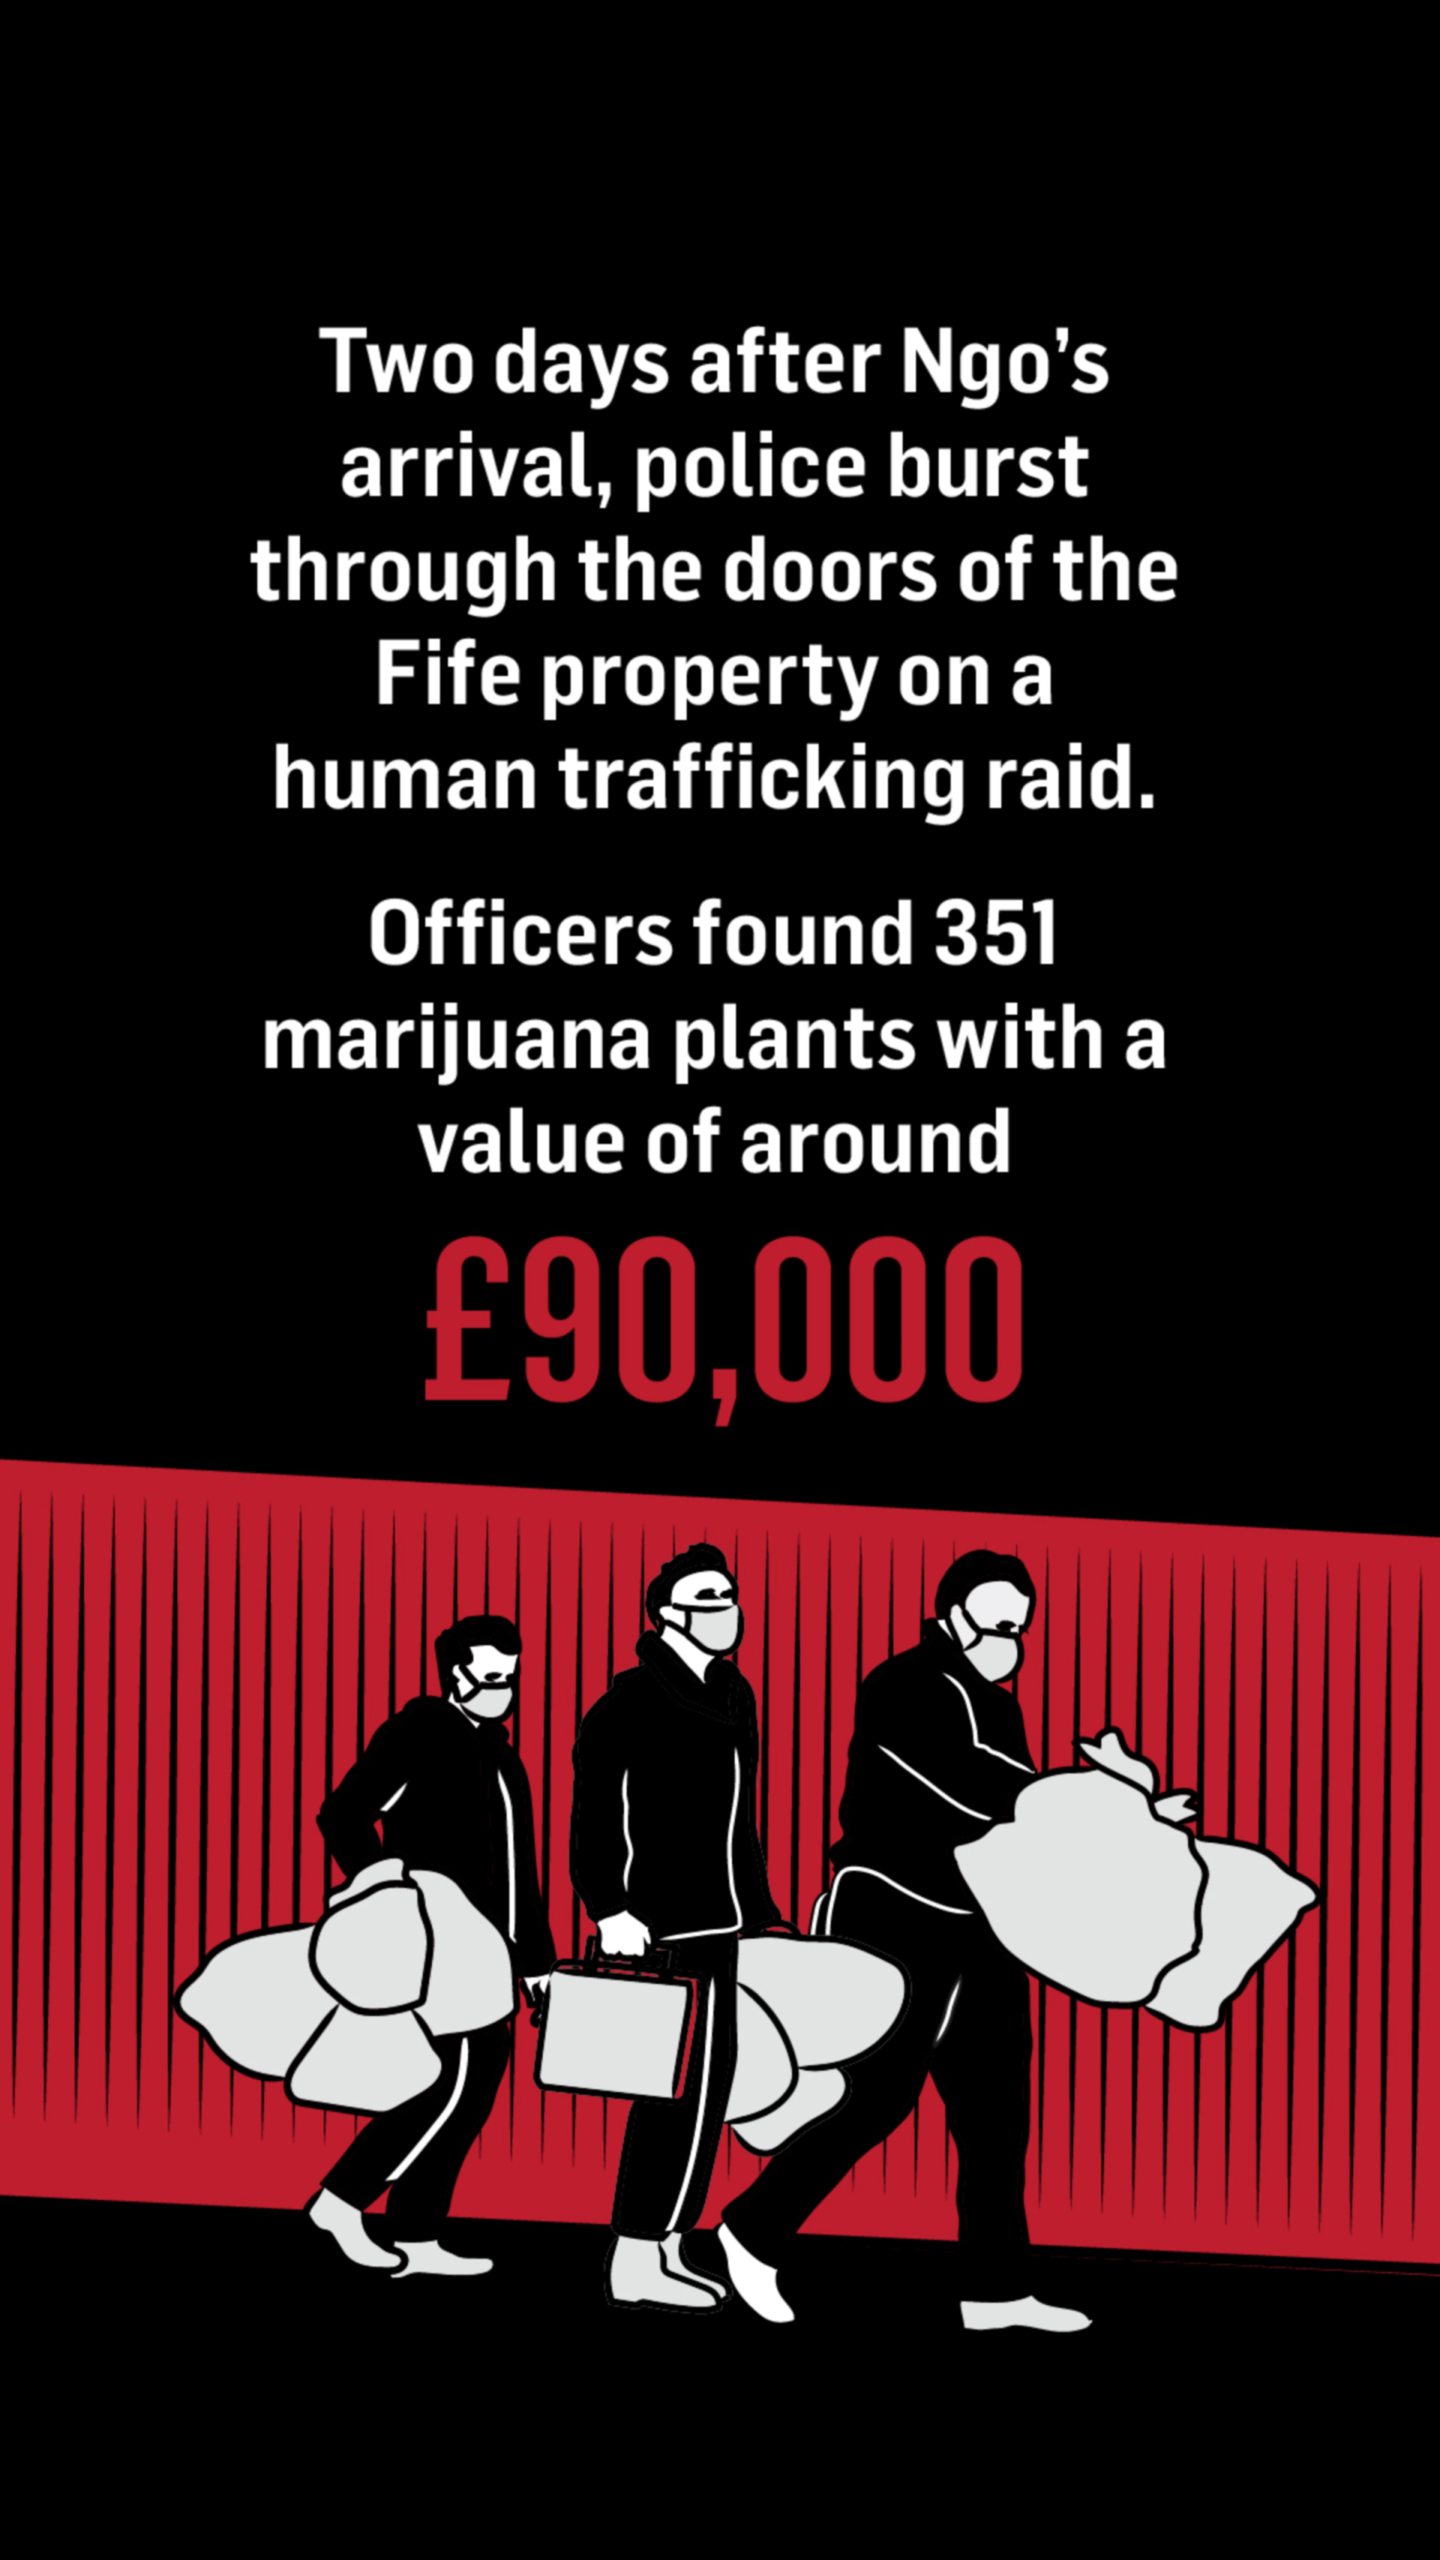 Men wearing masks carrying white bags below text which reads: Two days after Ngo's arrival, police burst through the doors of the Fife property on a human trafficking raid. Officers found 351 marijuana plants with a value of around £90,000.